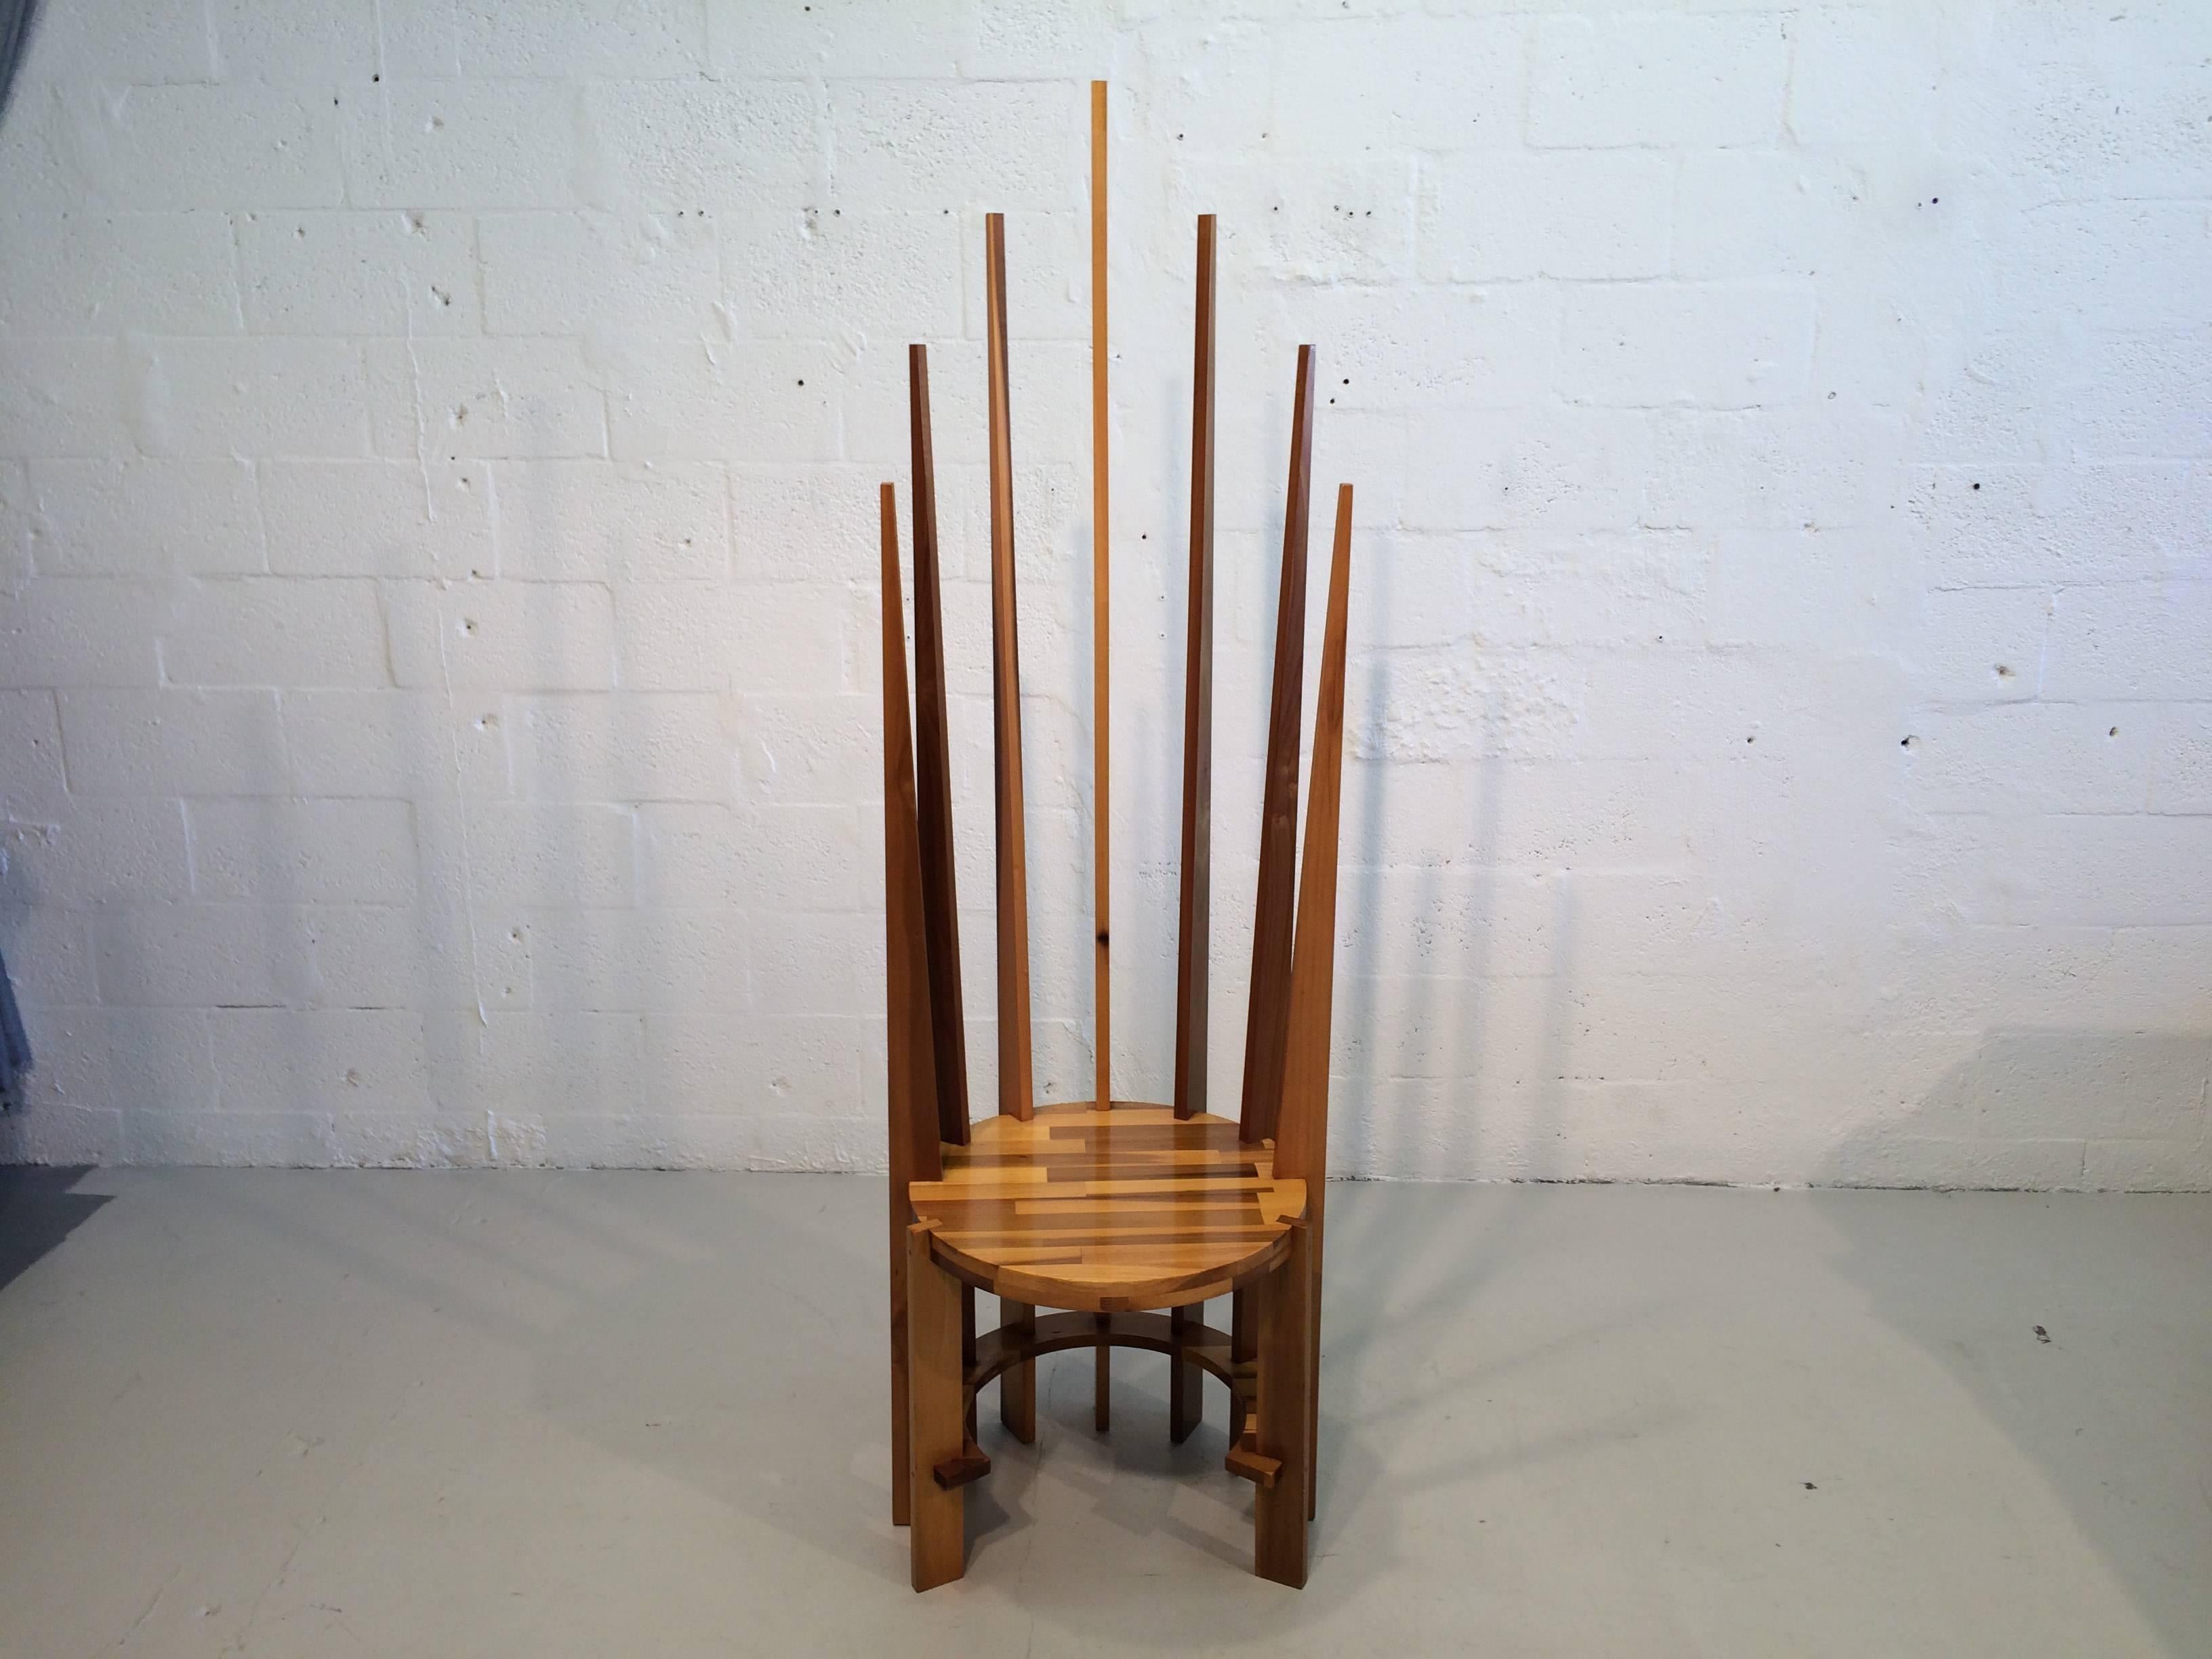 Unique American studio Craft throne chair. Please see all pictures, very unique designer chair.